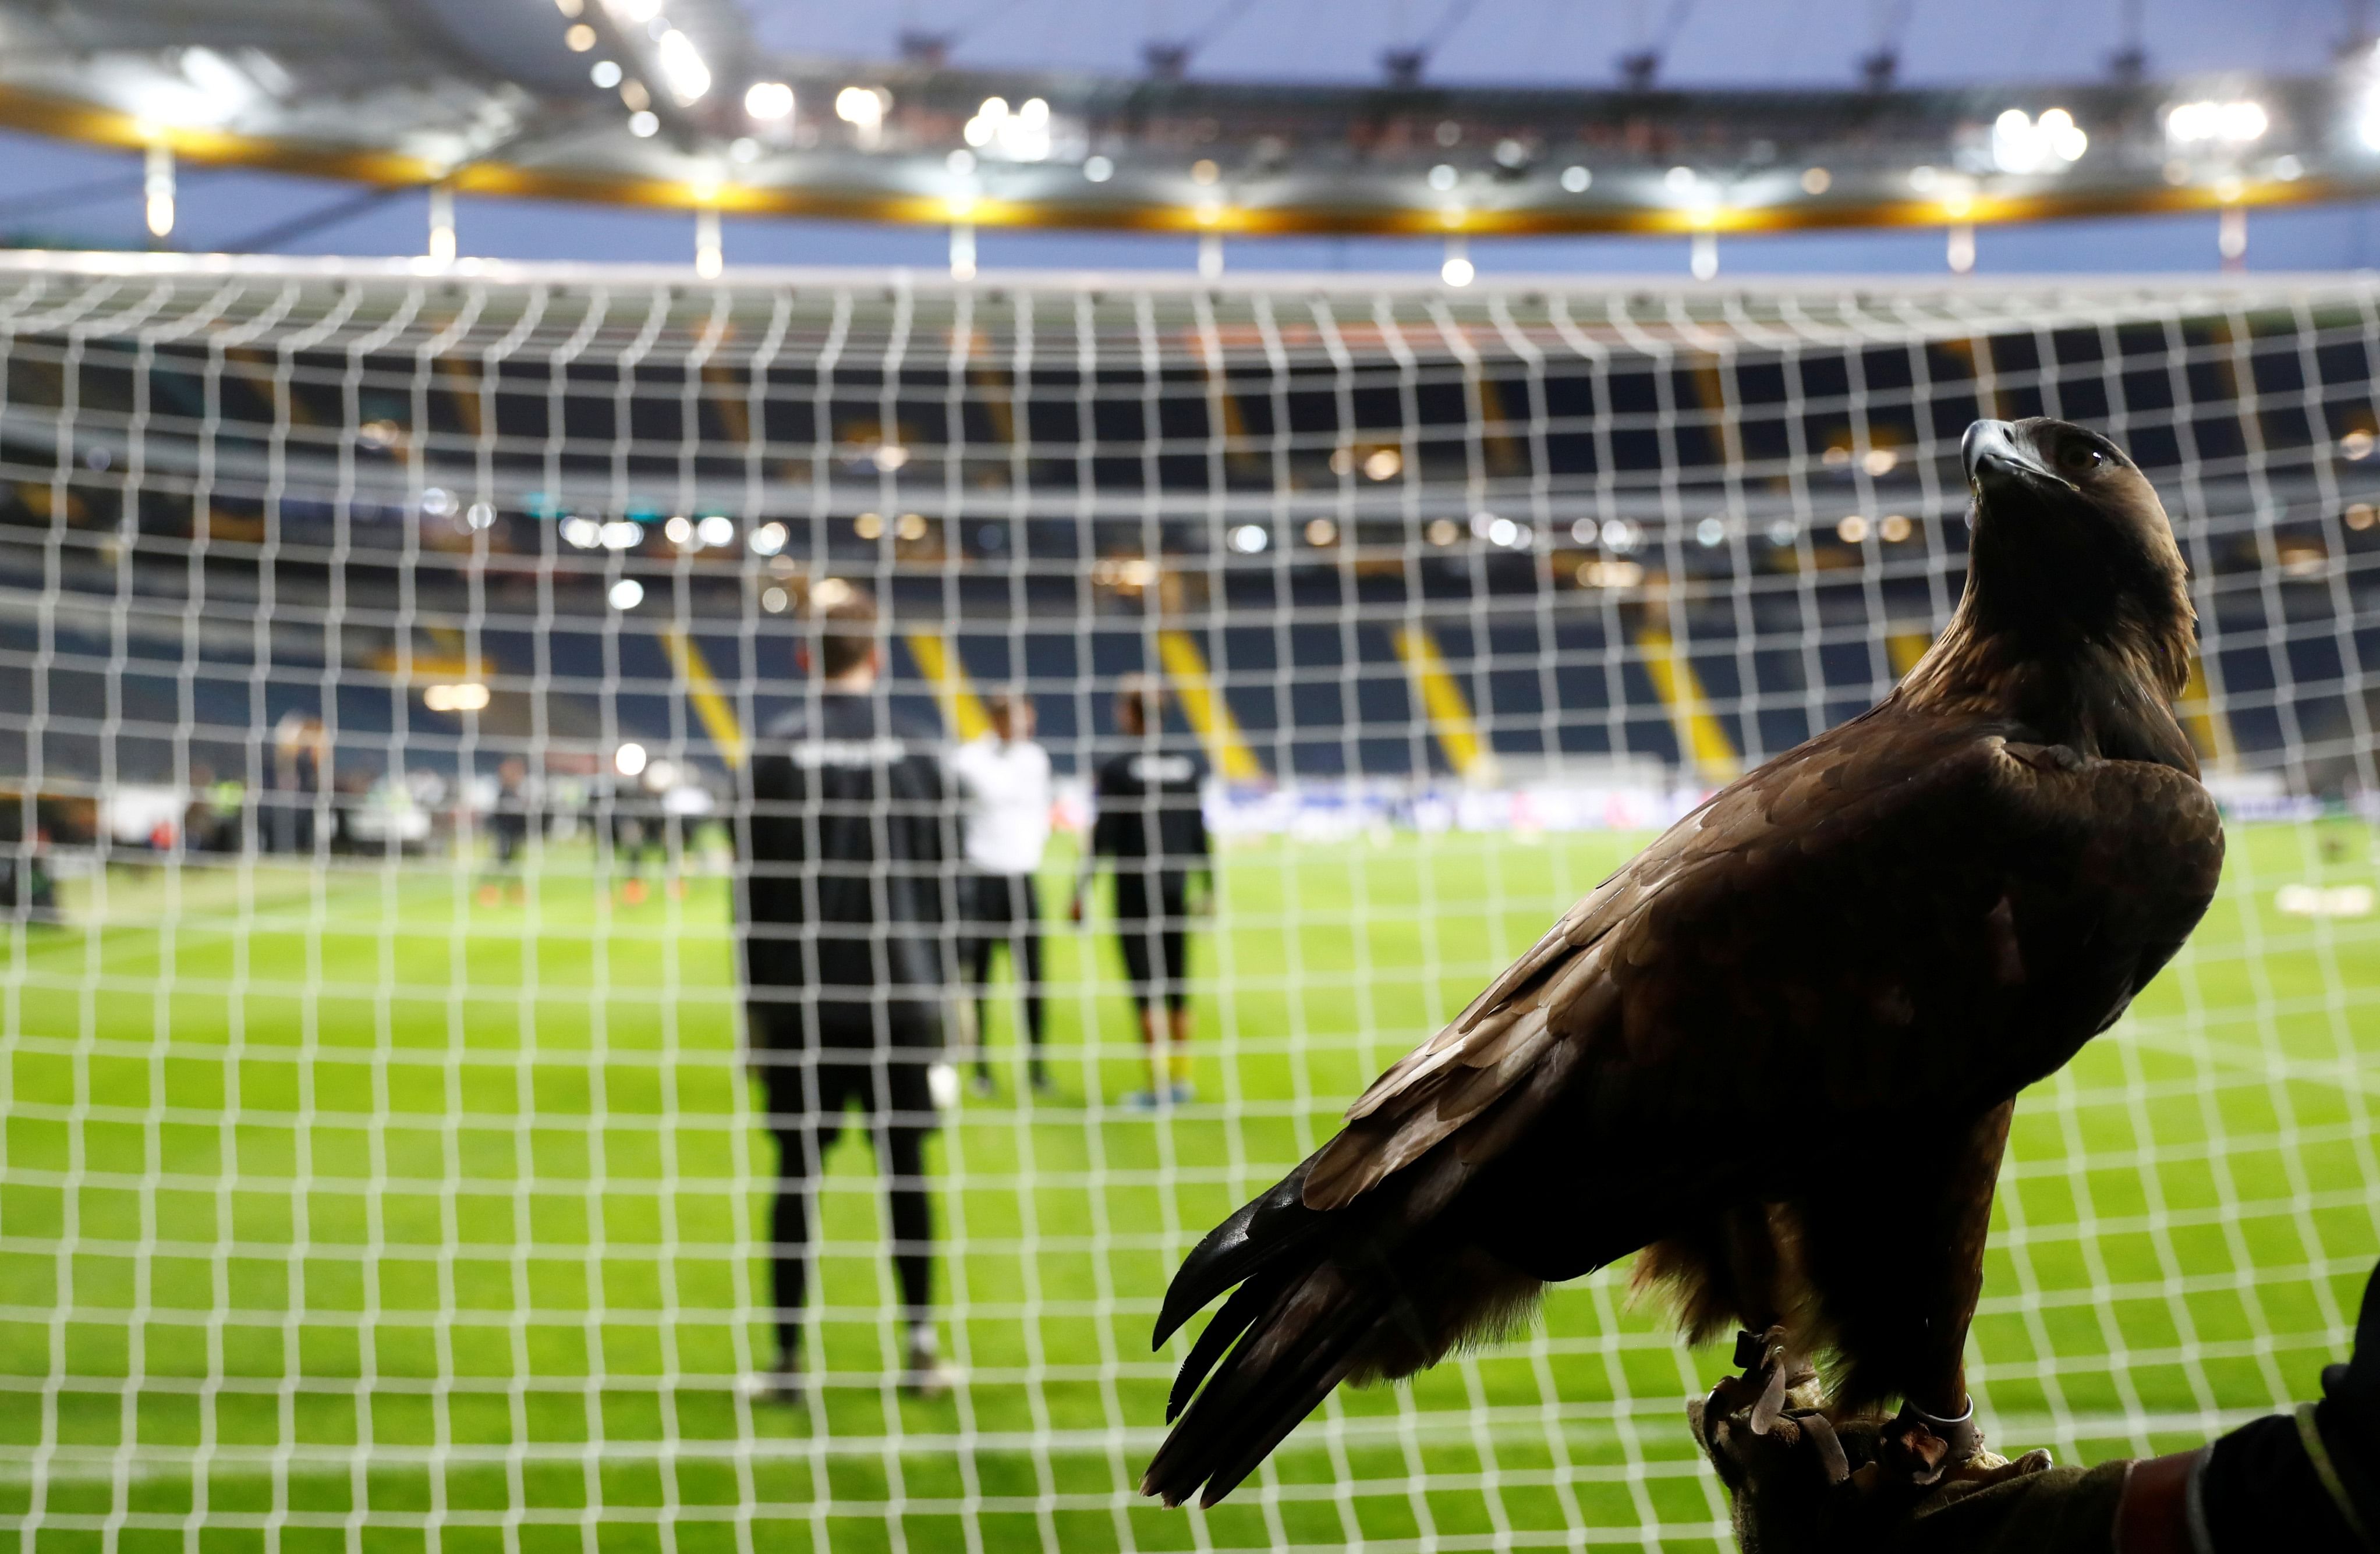 Europe League: Eintracht Frankfurt's mascot Attila the eagle inside the stadium before the match which will be played behind closed doors (Credit: Reuters)